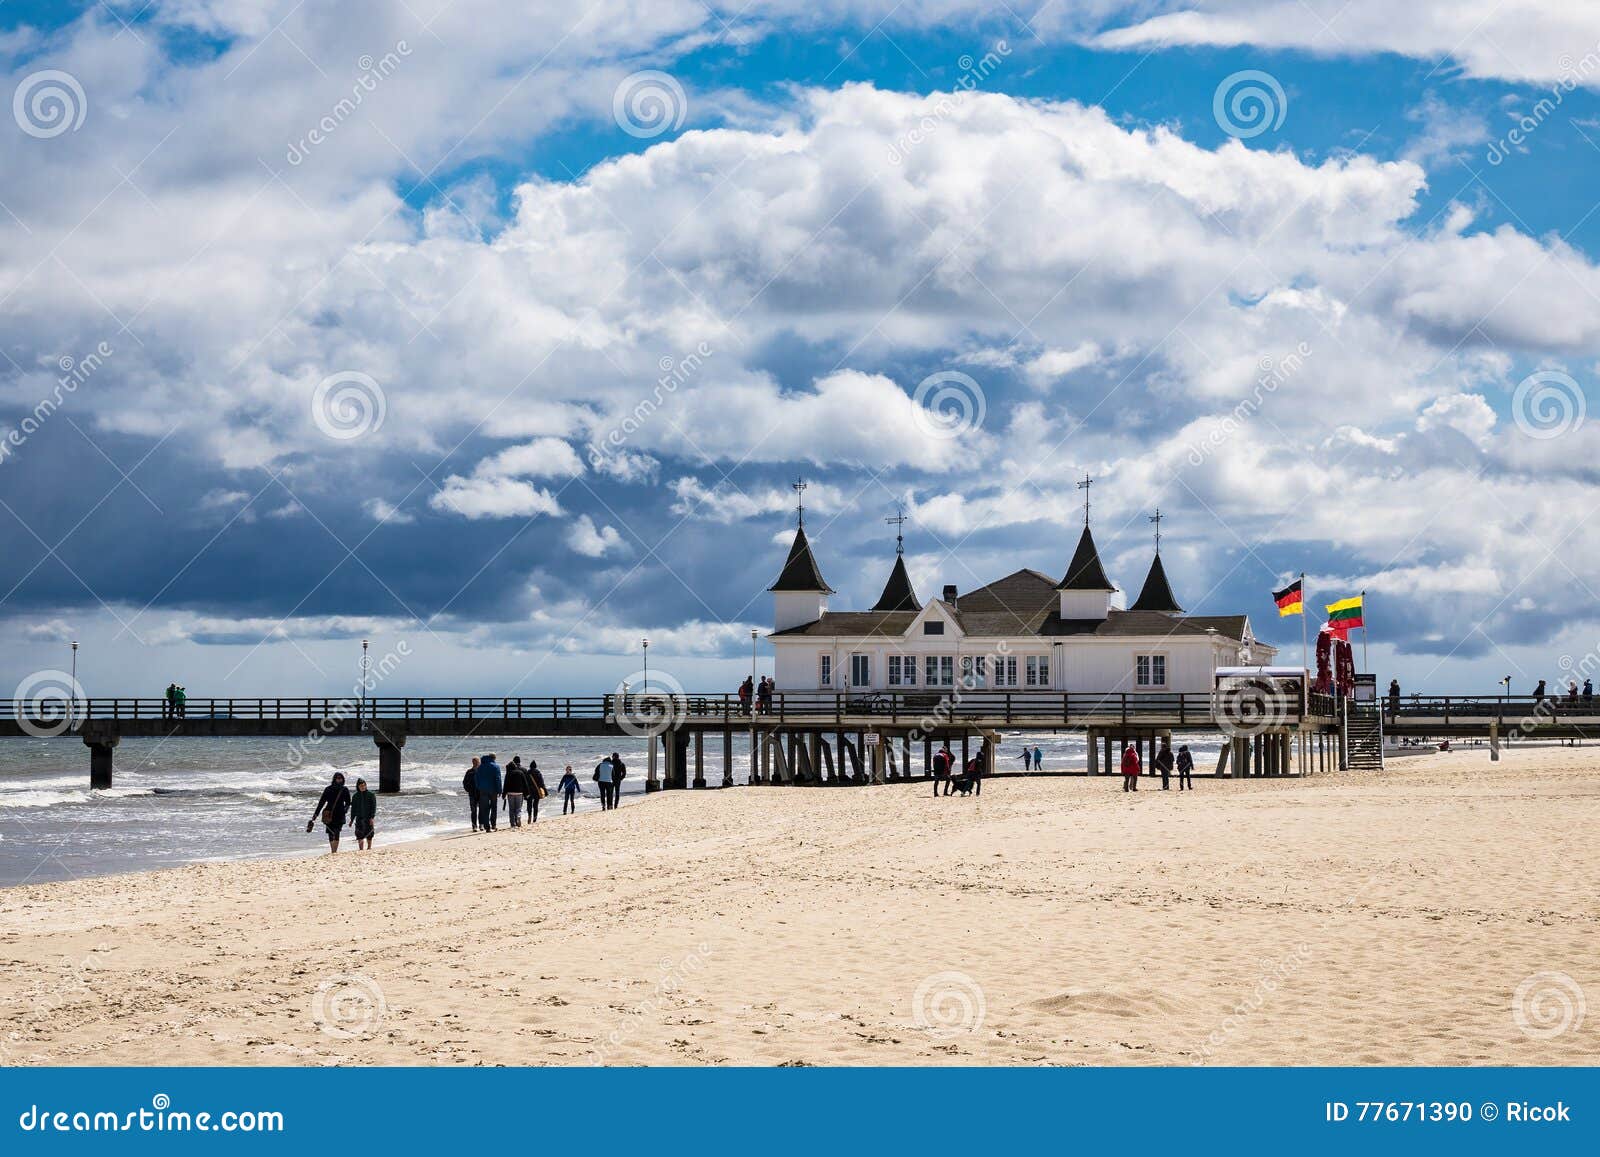 The Pier In Ahlbeck On The Island Usedom Editorial Image Image Of Journey Tourism 77671390